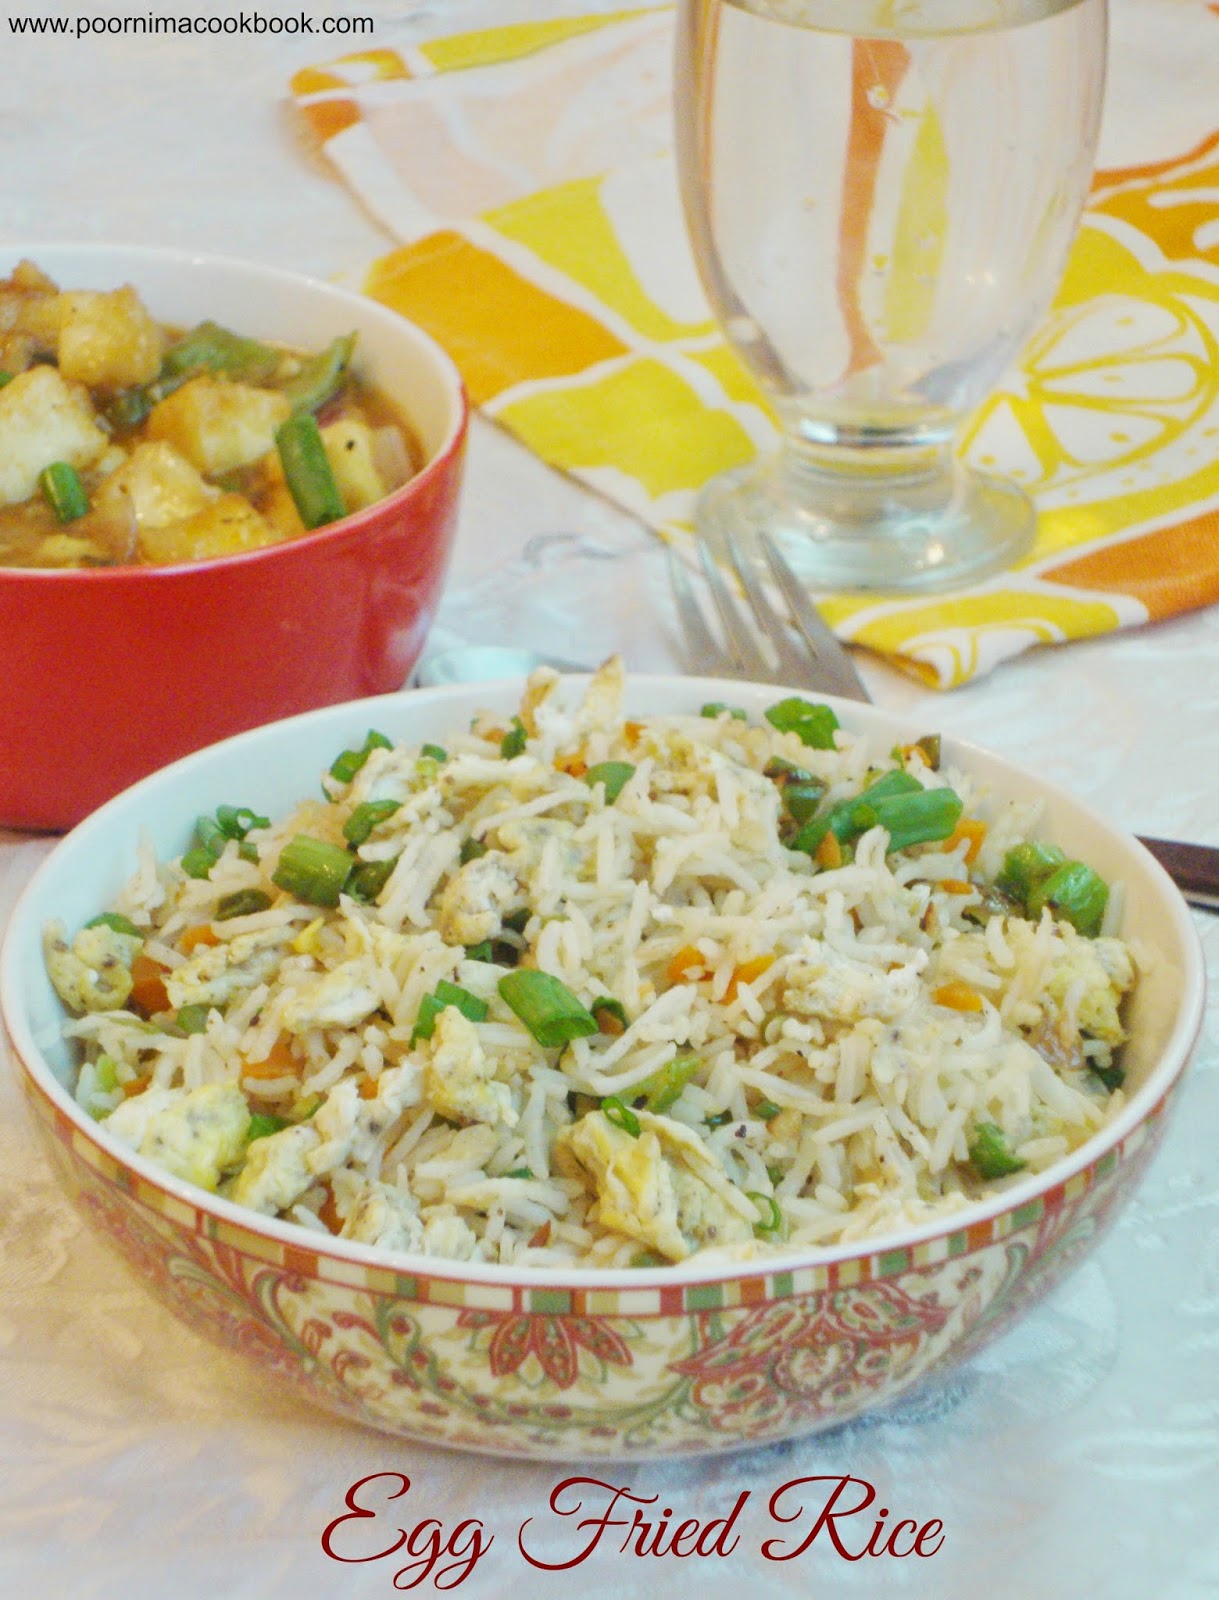 Poornima's Cook Book: Egg Fried Rice (Indo Chinese)